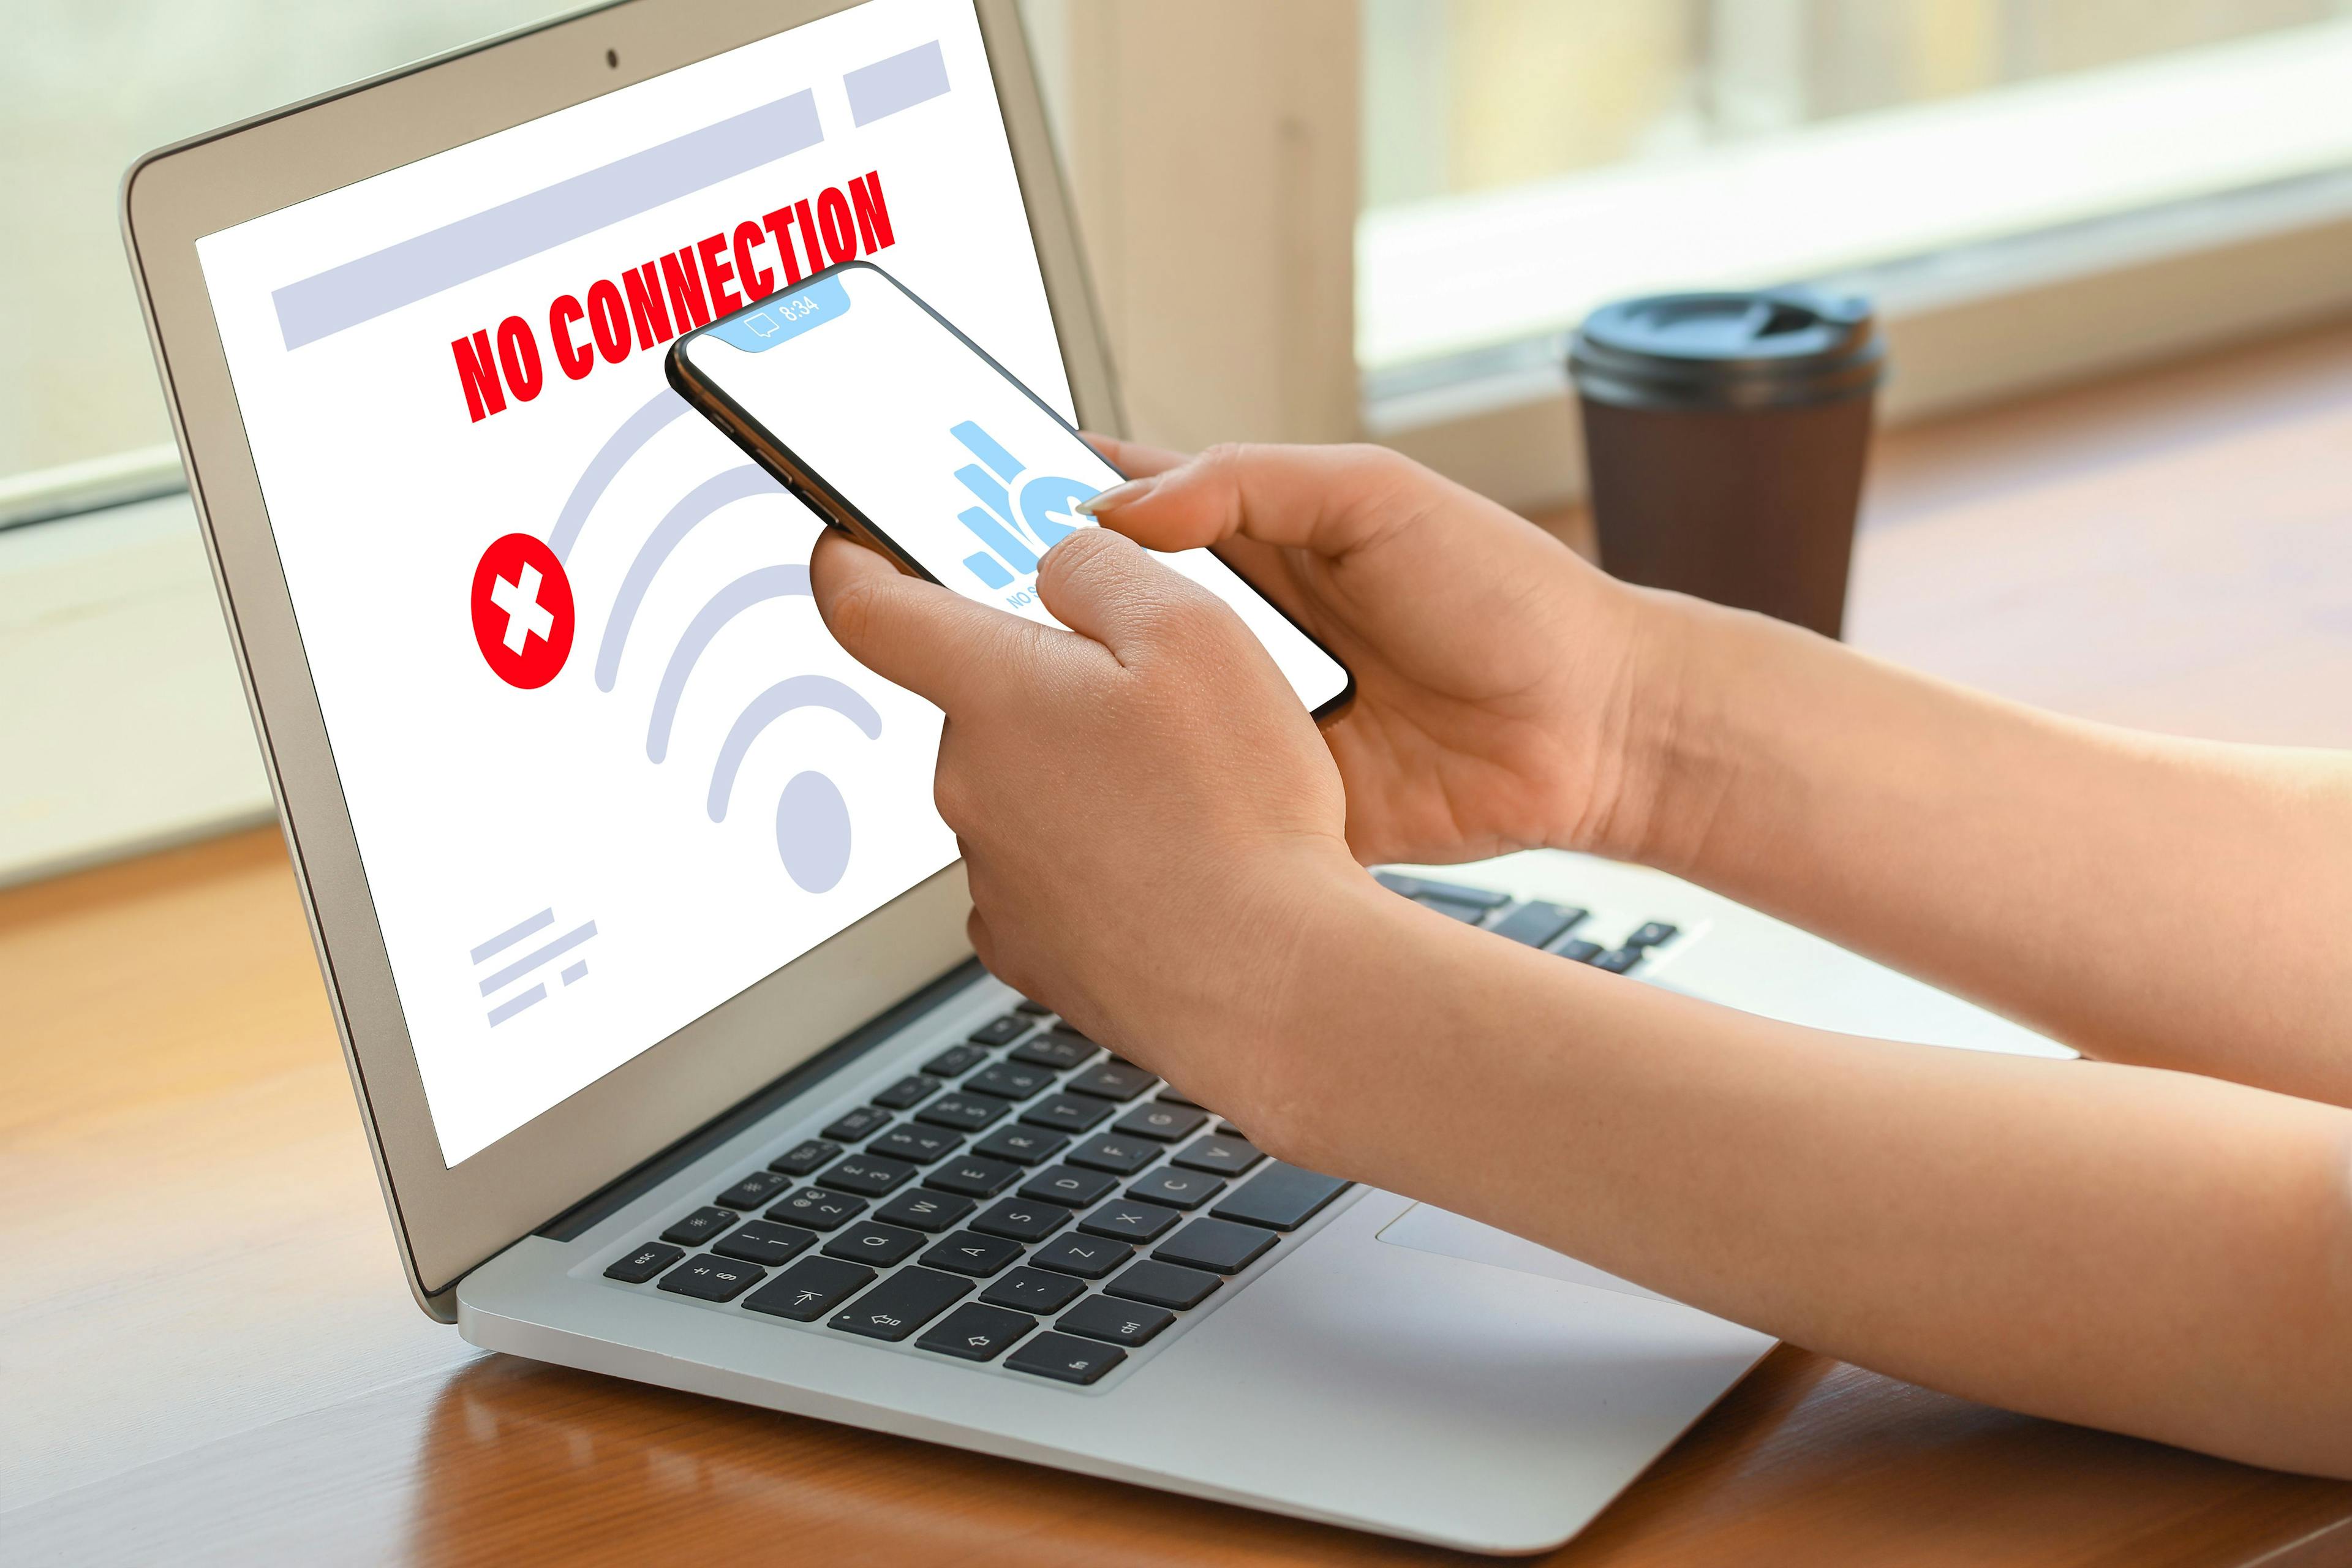 "No connection" displayed on laptop with person holding cellphone ©Pixel-Shot-stock.adobe.com